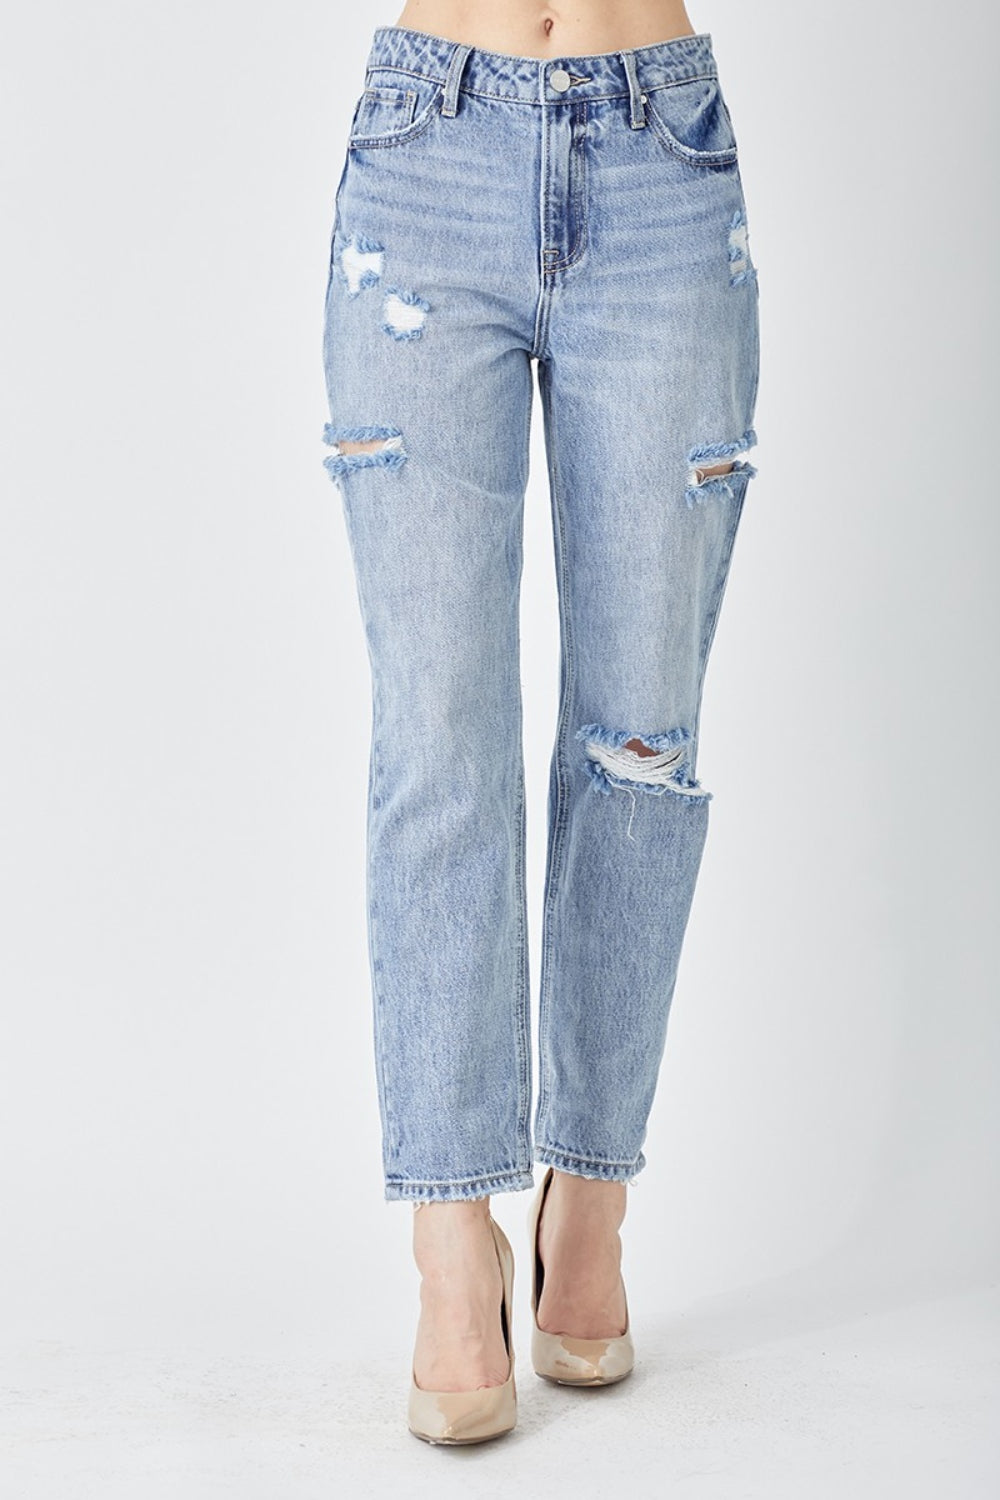 RISEN Distressed Slim Cropped Jeans - Jeans - FITGGINS